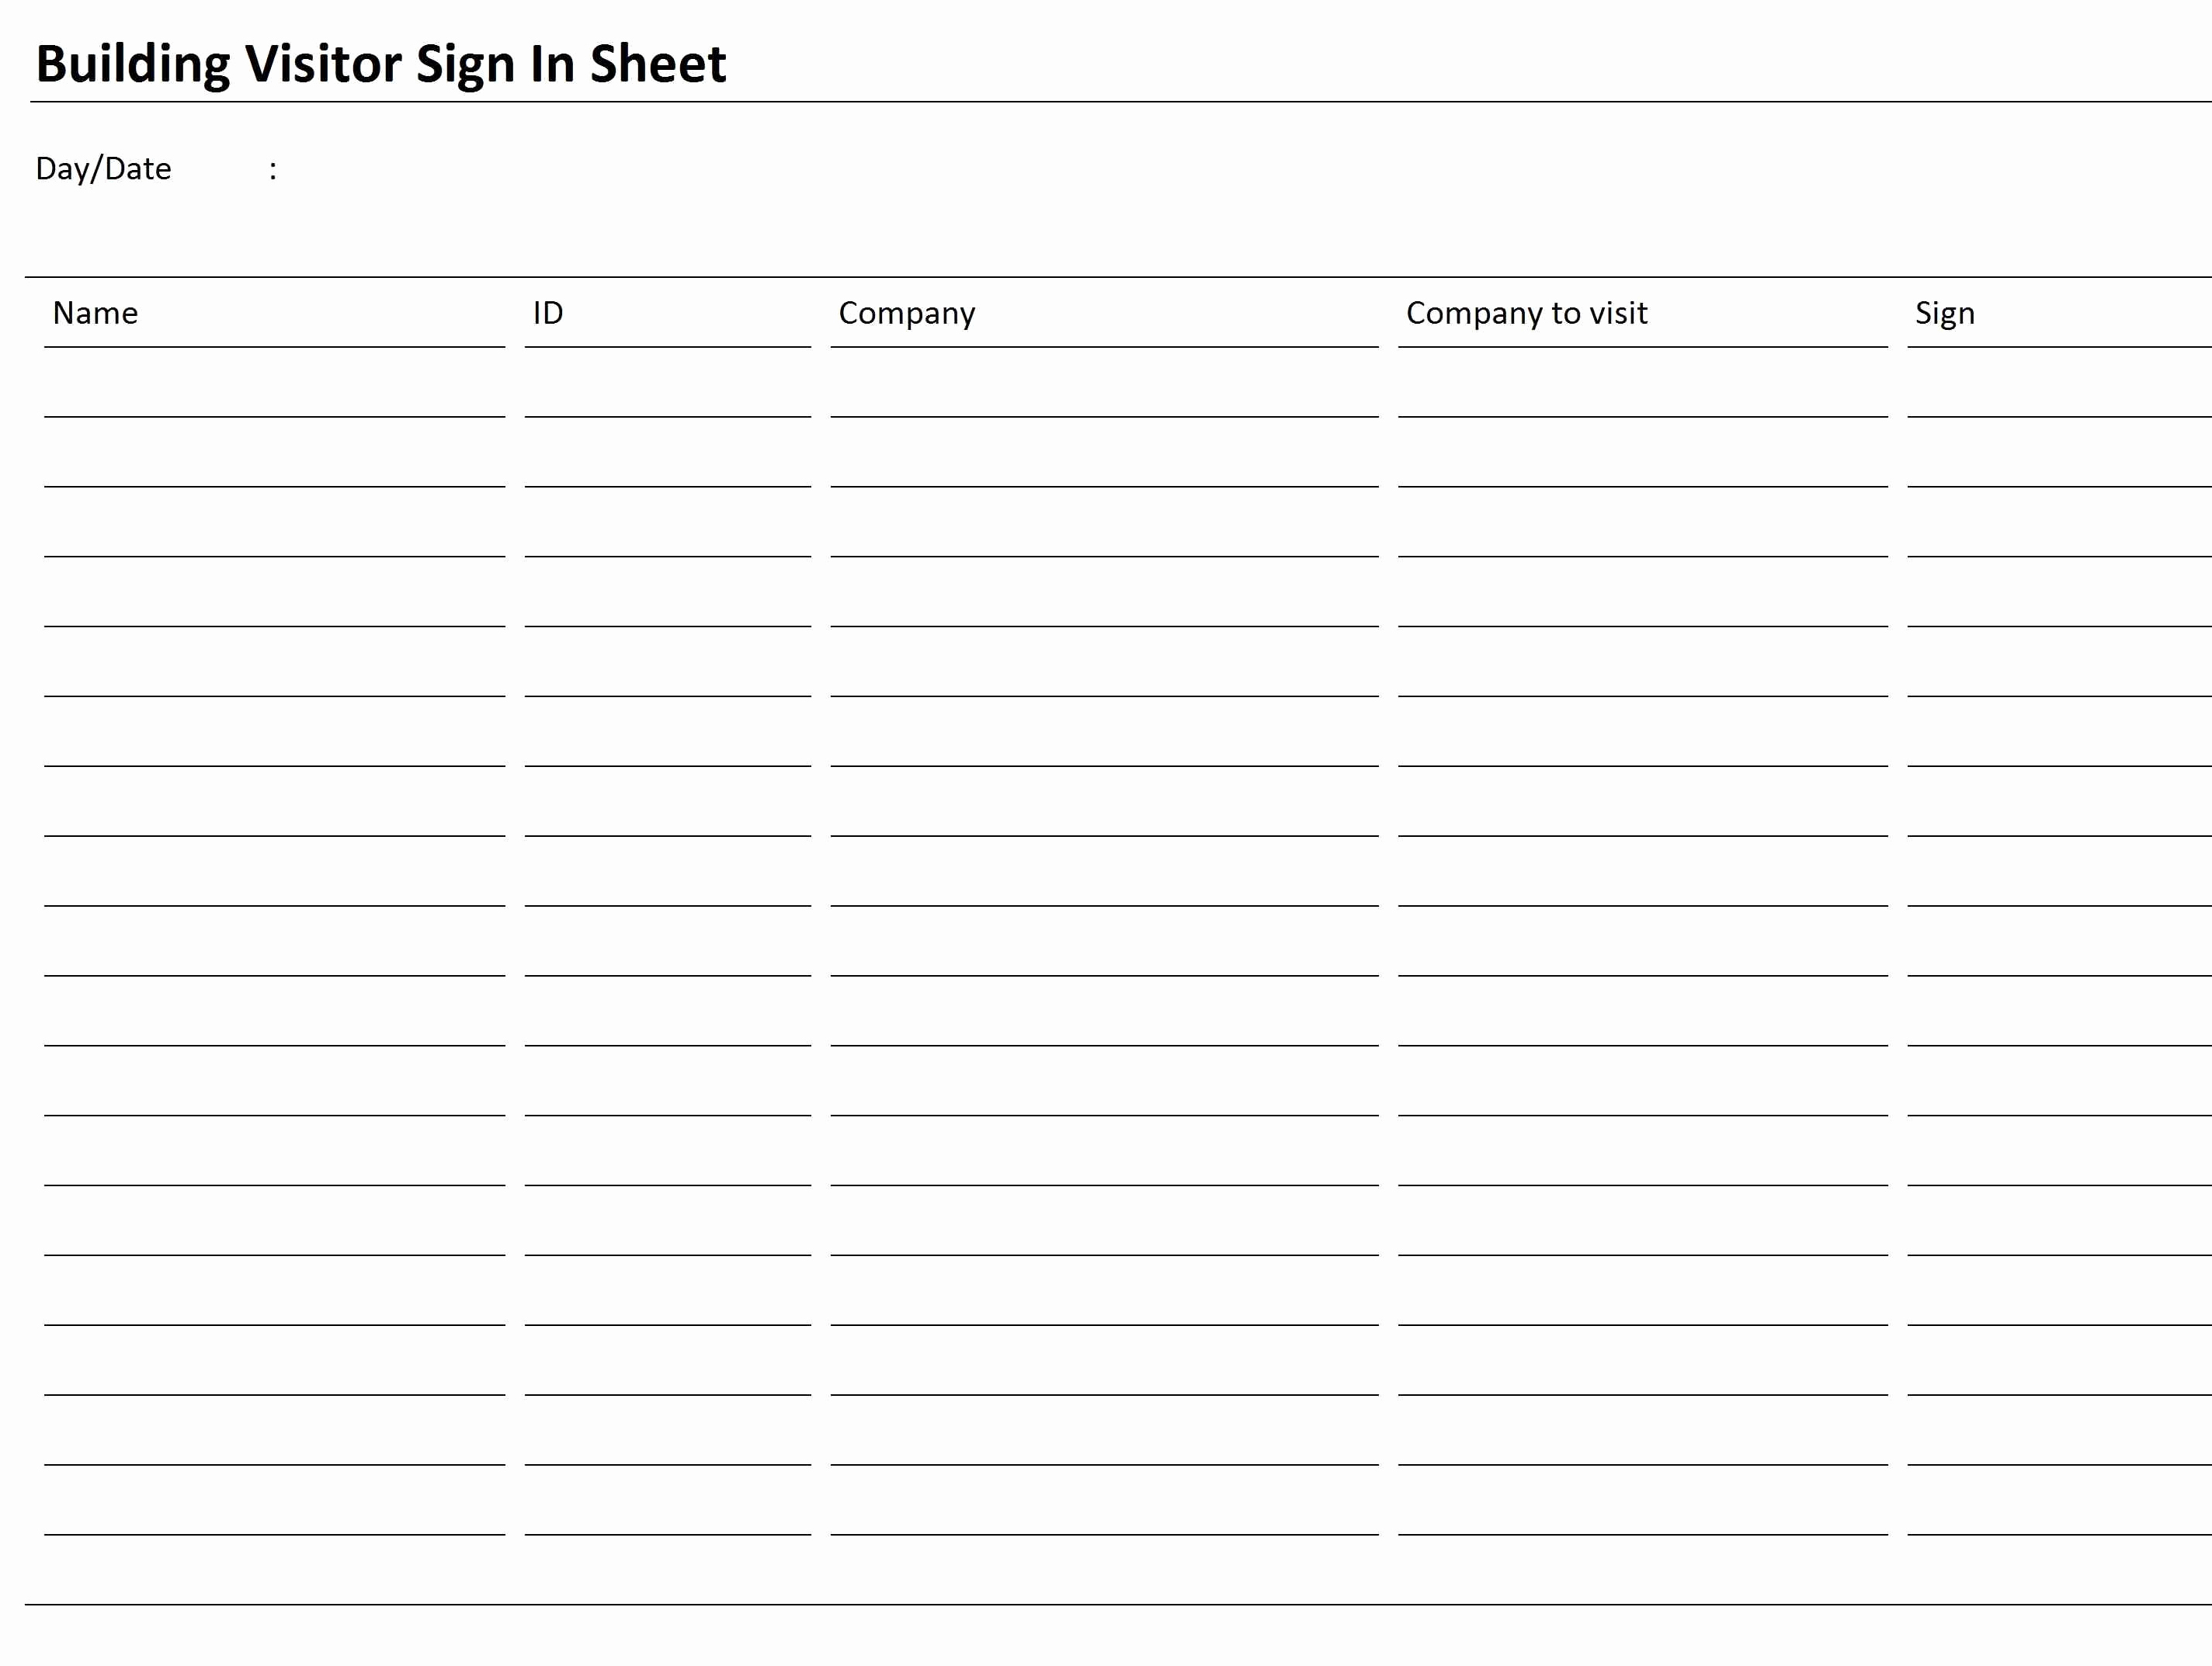 Visitors Sign In Sheet Beautiful Building Visitor Sign In Sheet Fice Templates